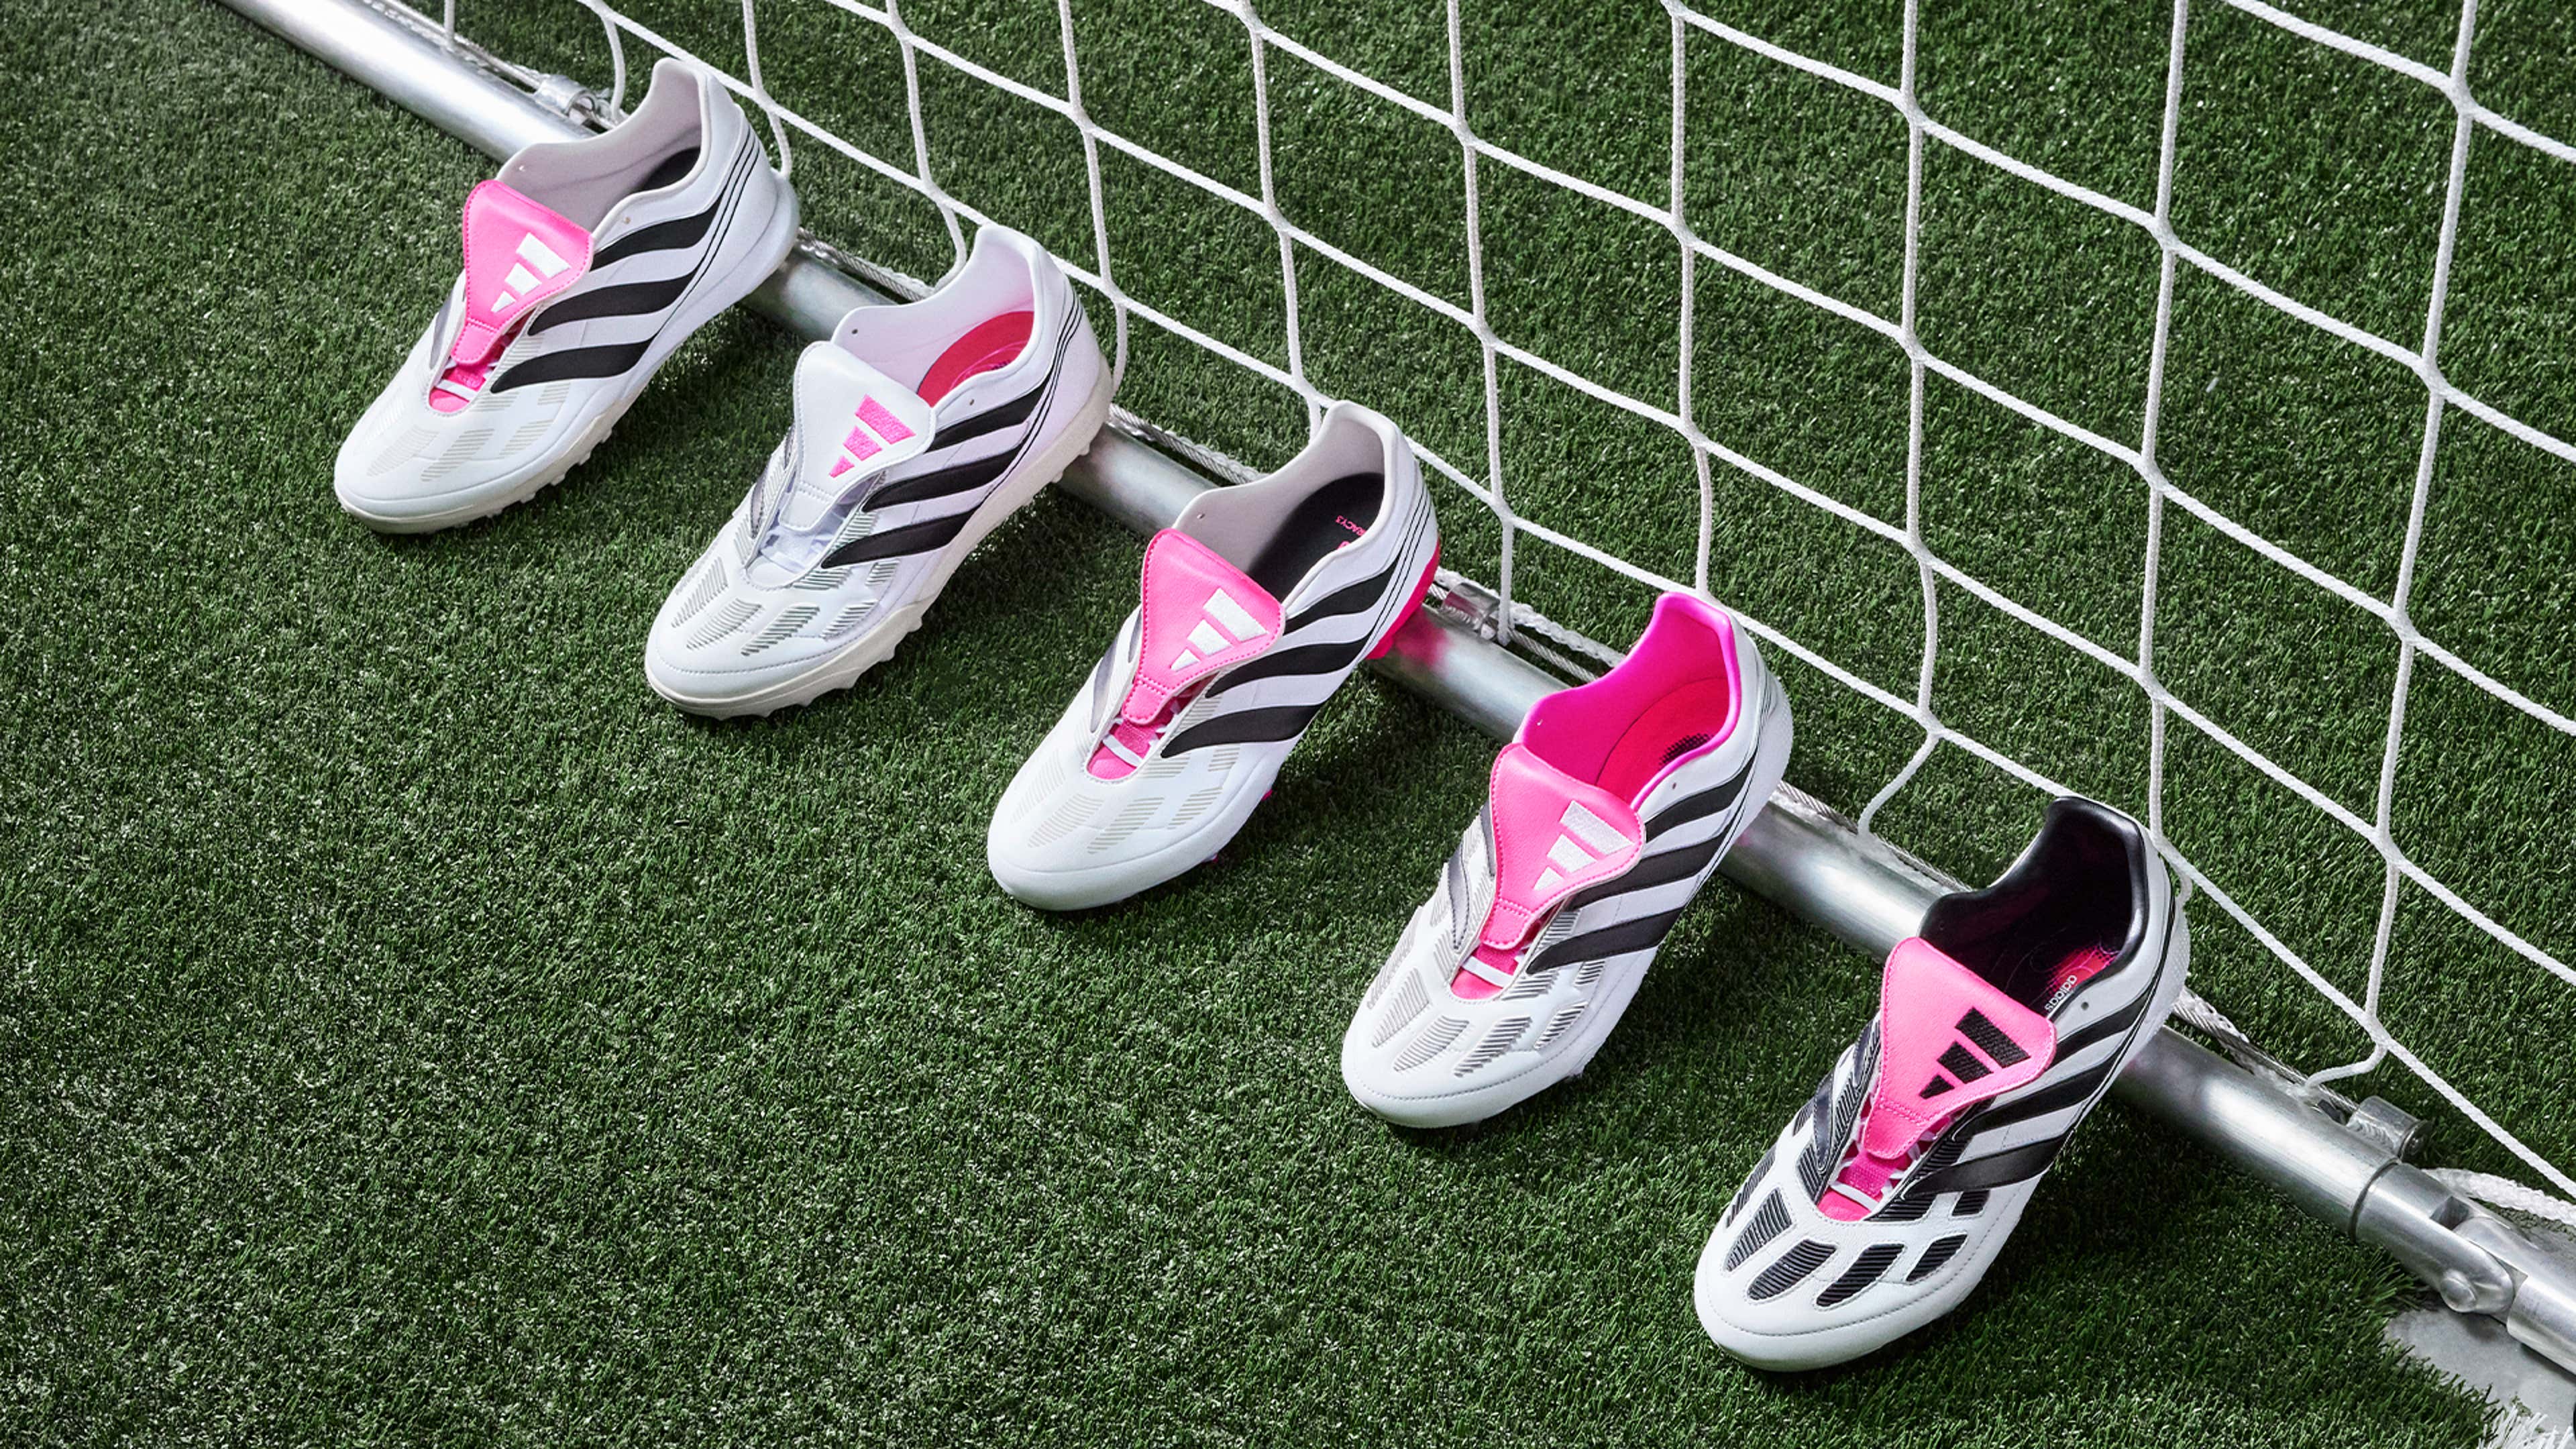 adidas bring the legacy of the Predator back to life with the